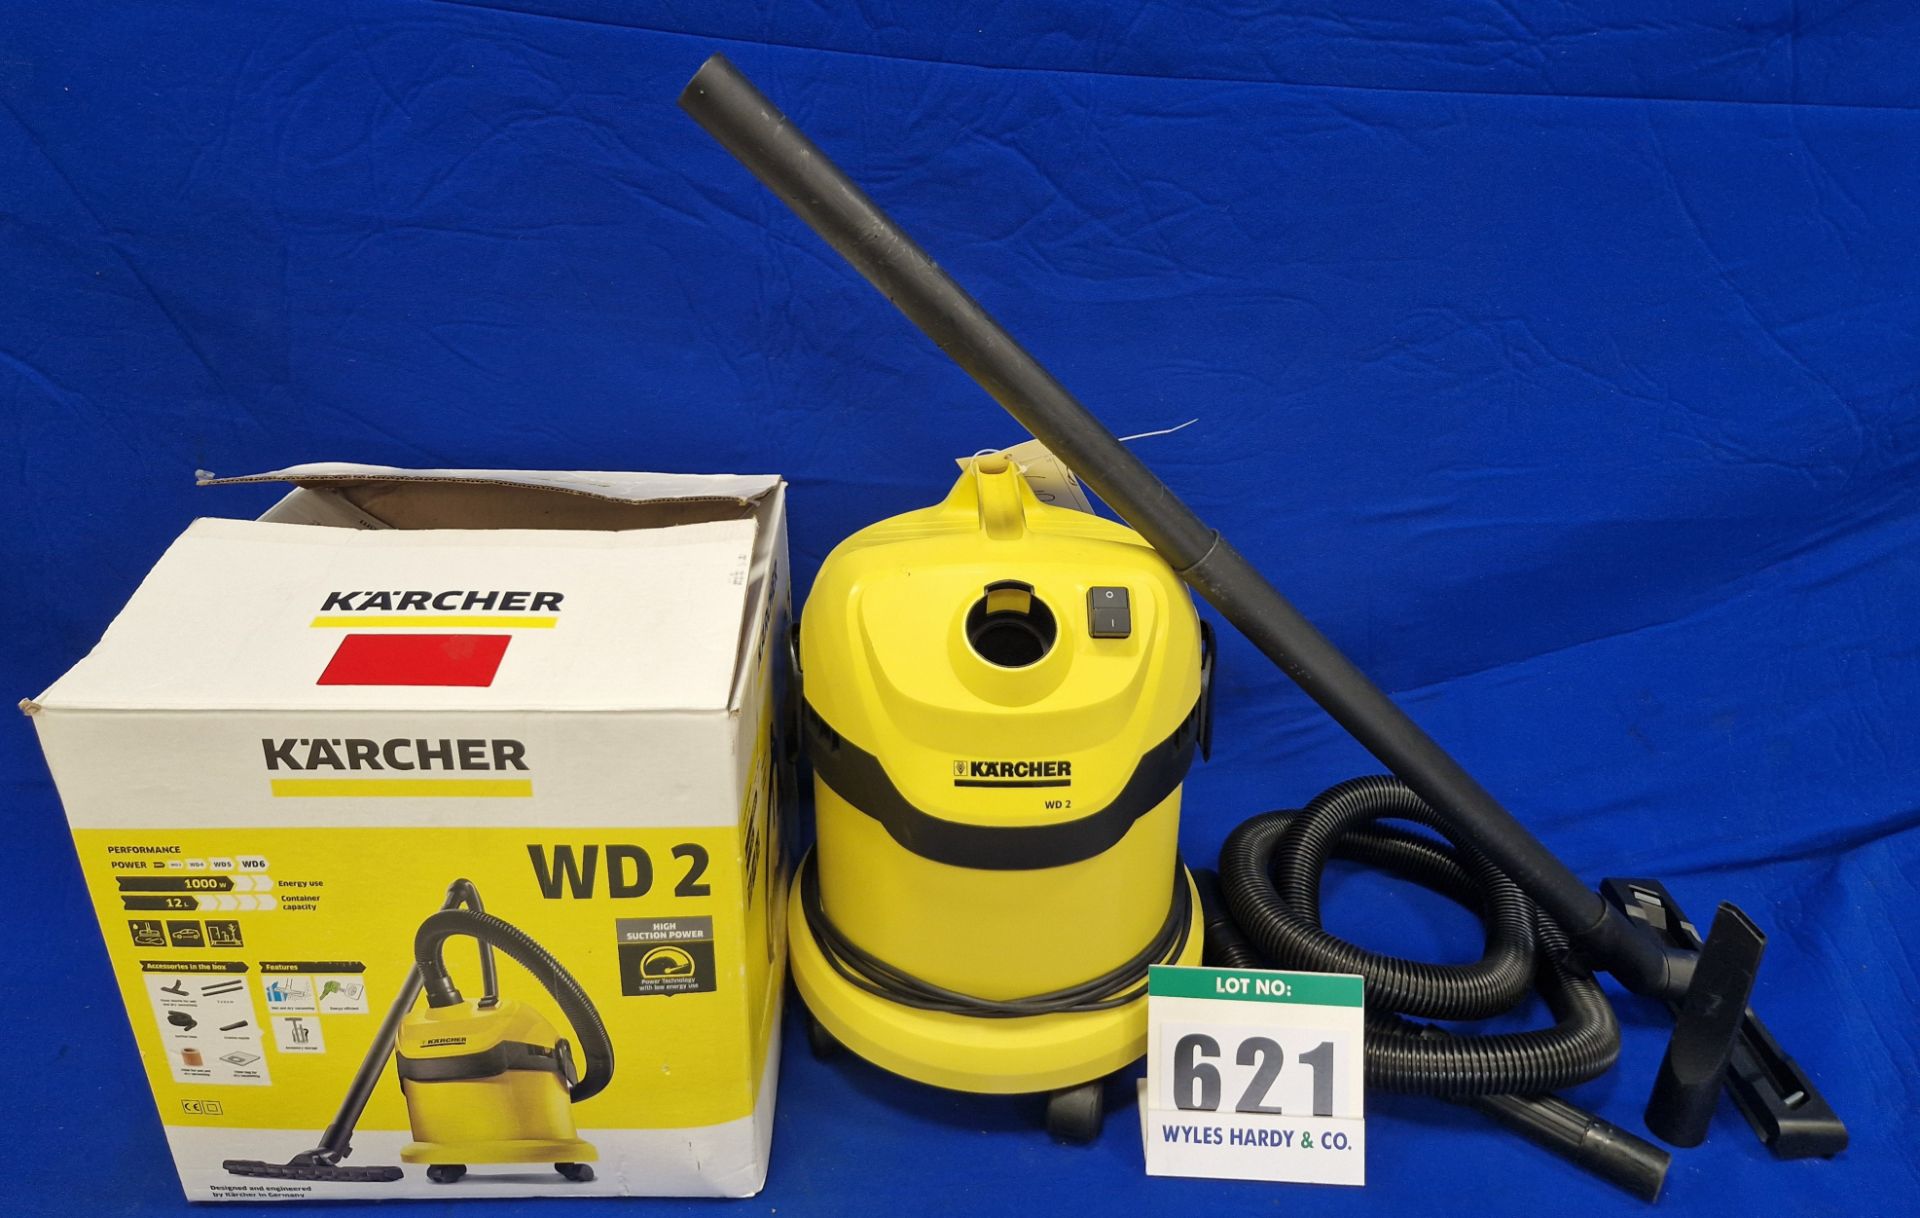 One KARCHER WD2 Wet/Dry Vacuum Cleaner